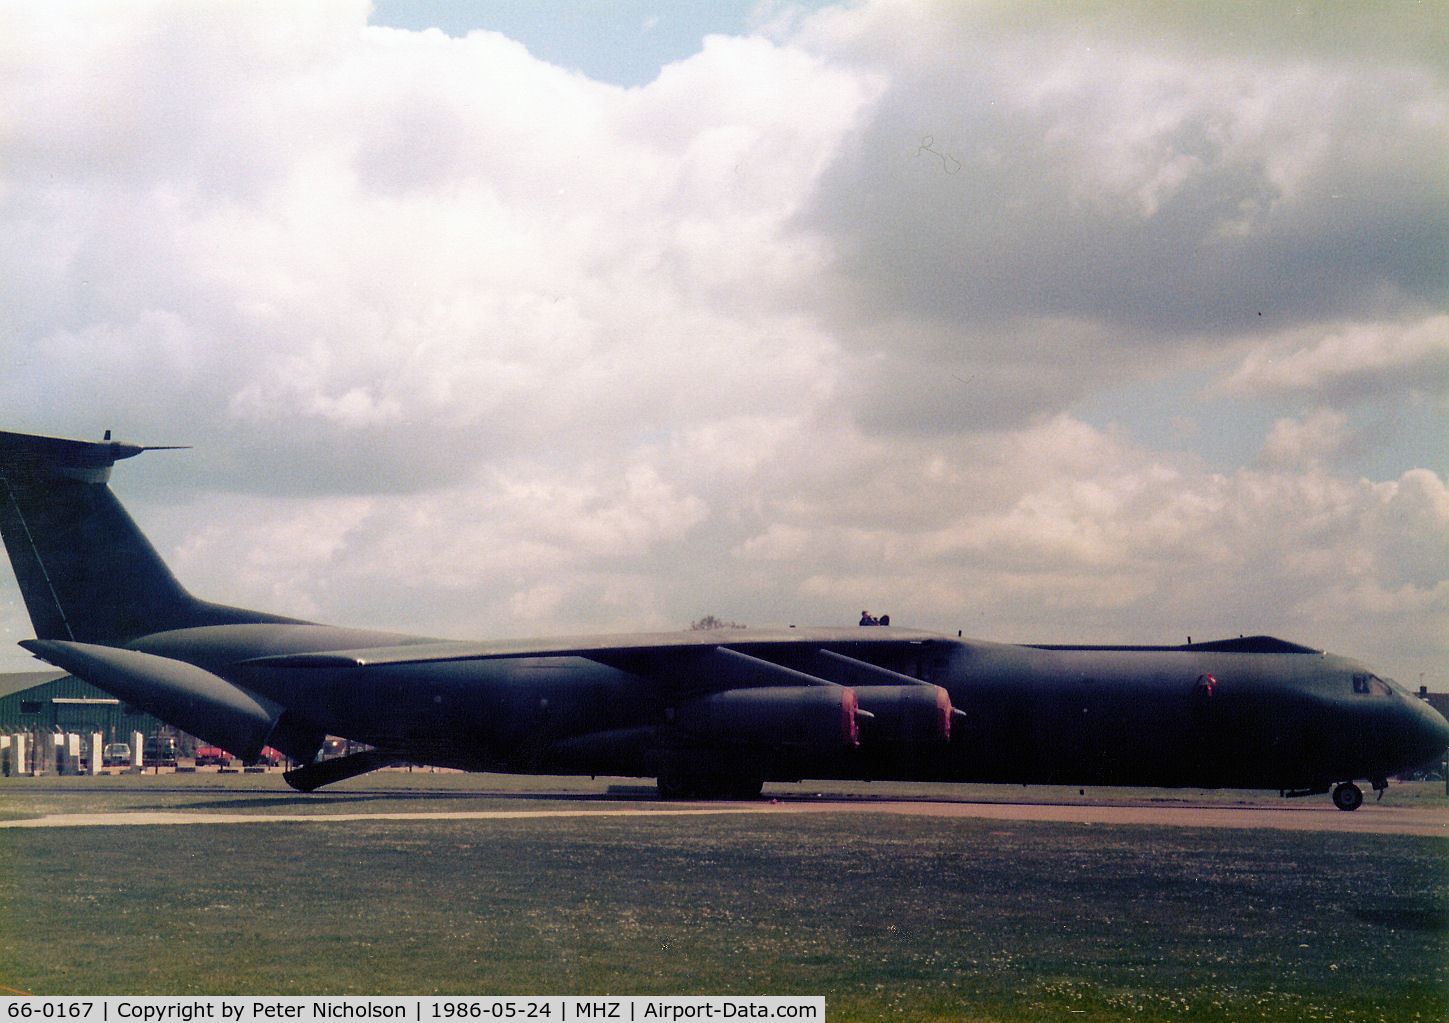 66-0167, 1966 Lockheed C-141B Starlifter C/N 300-6193, C-141B Starlifter of 437th Military Airlift Wing at Charleston AFB on display at the 1986 RAF Mildenhall Air Fete.